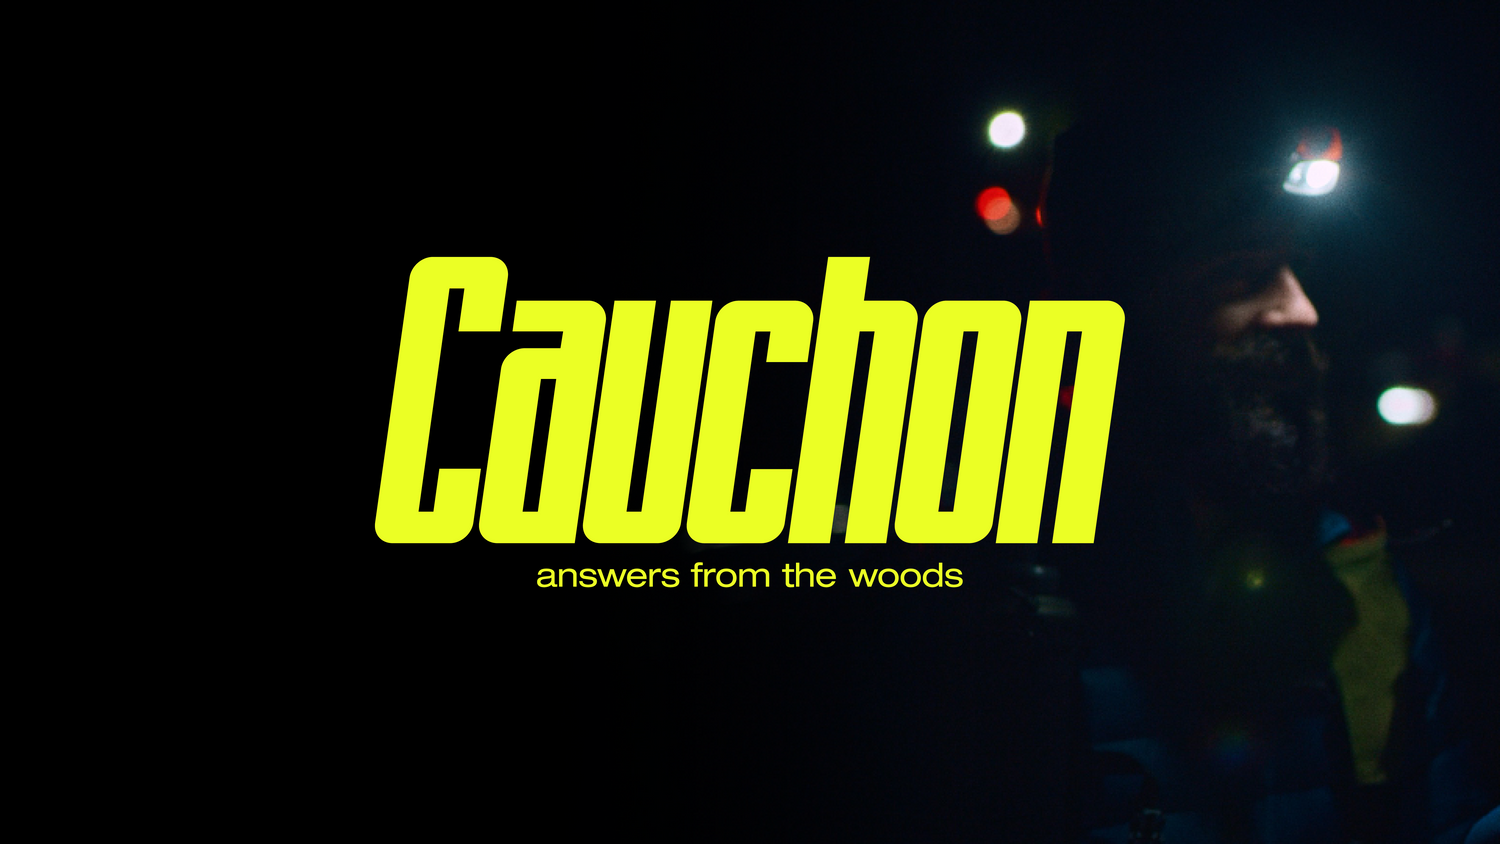 CAUCHON: answers from the woods